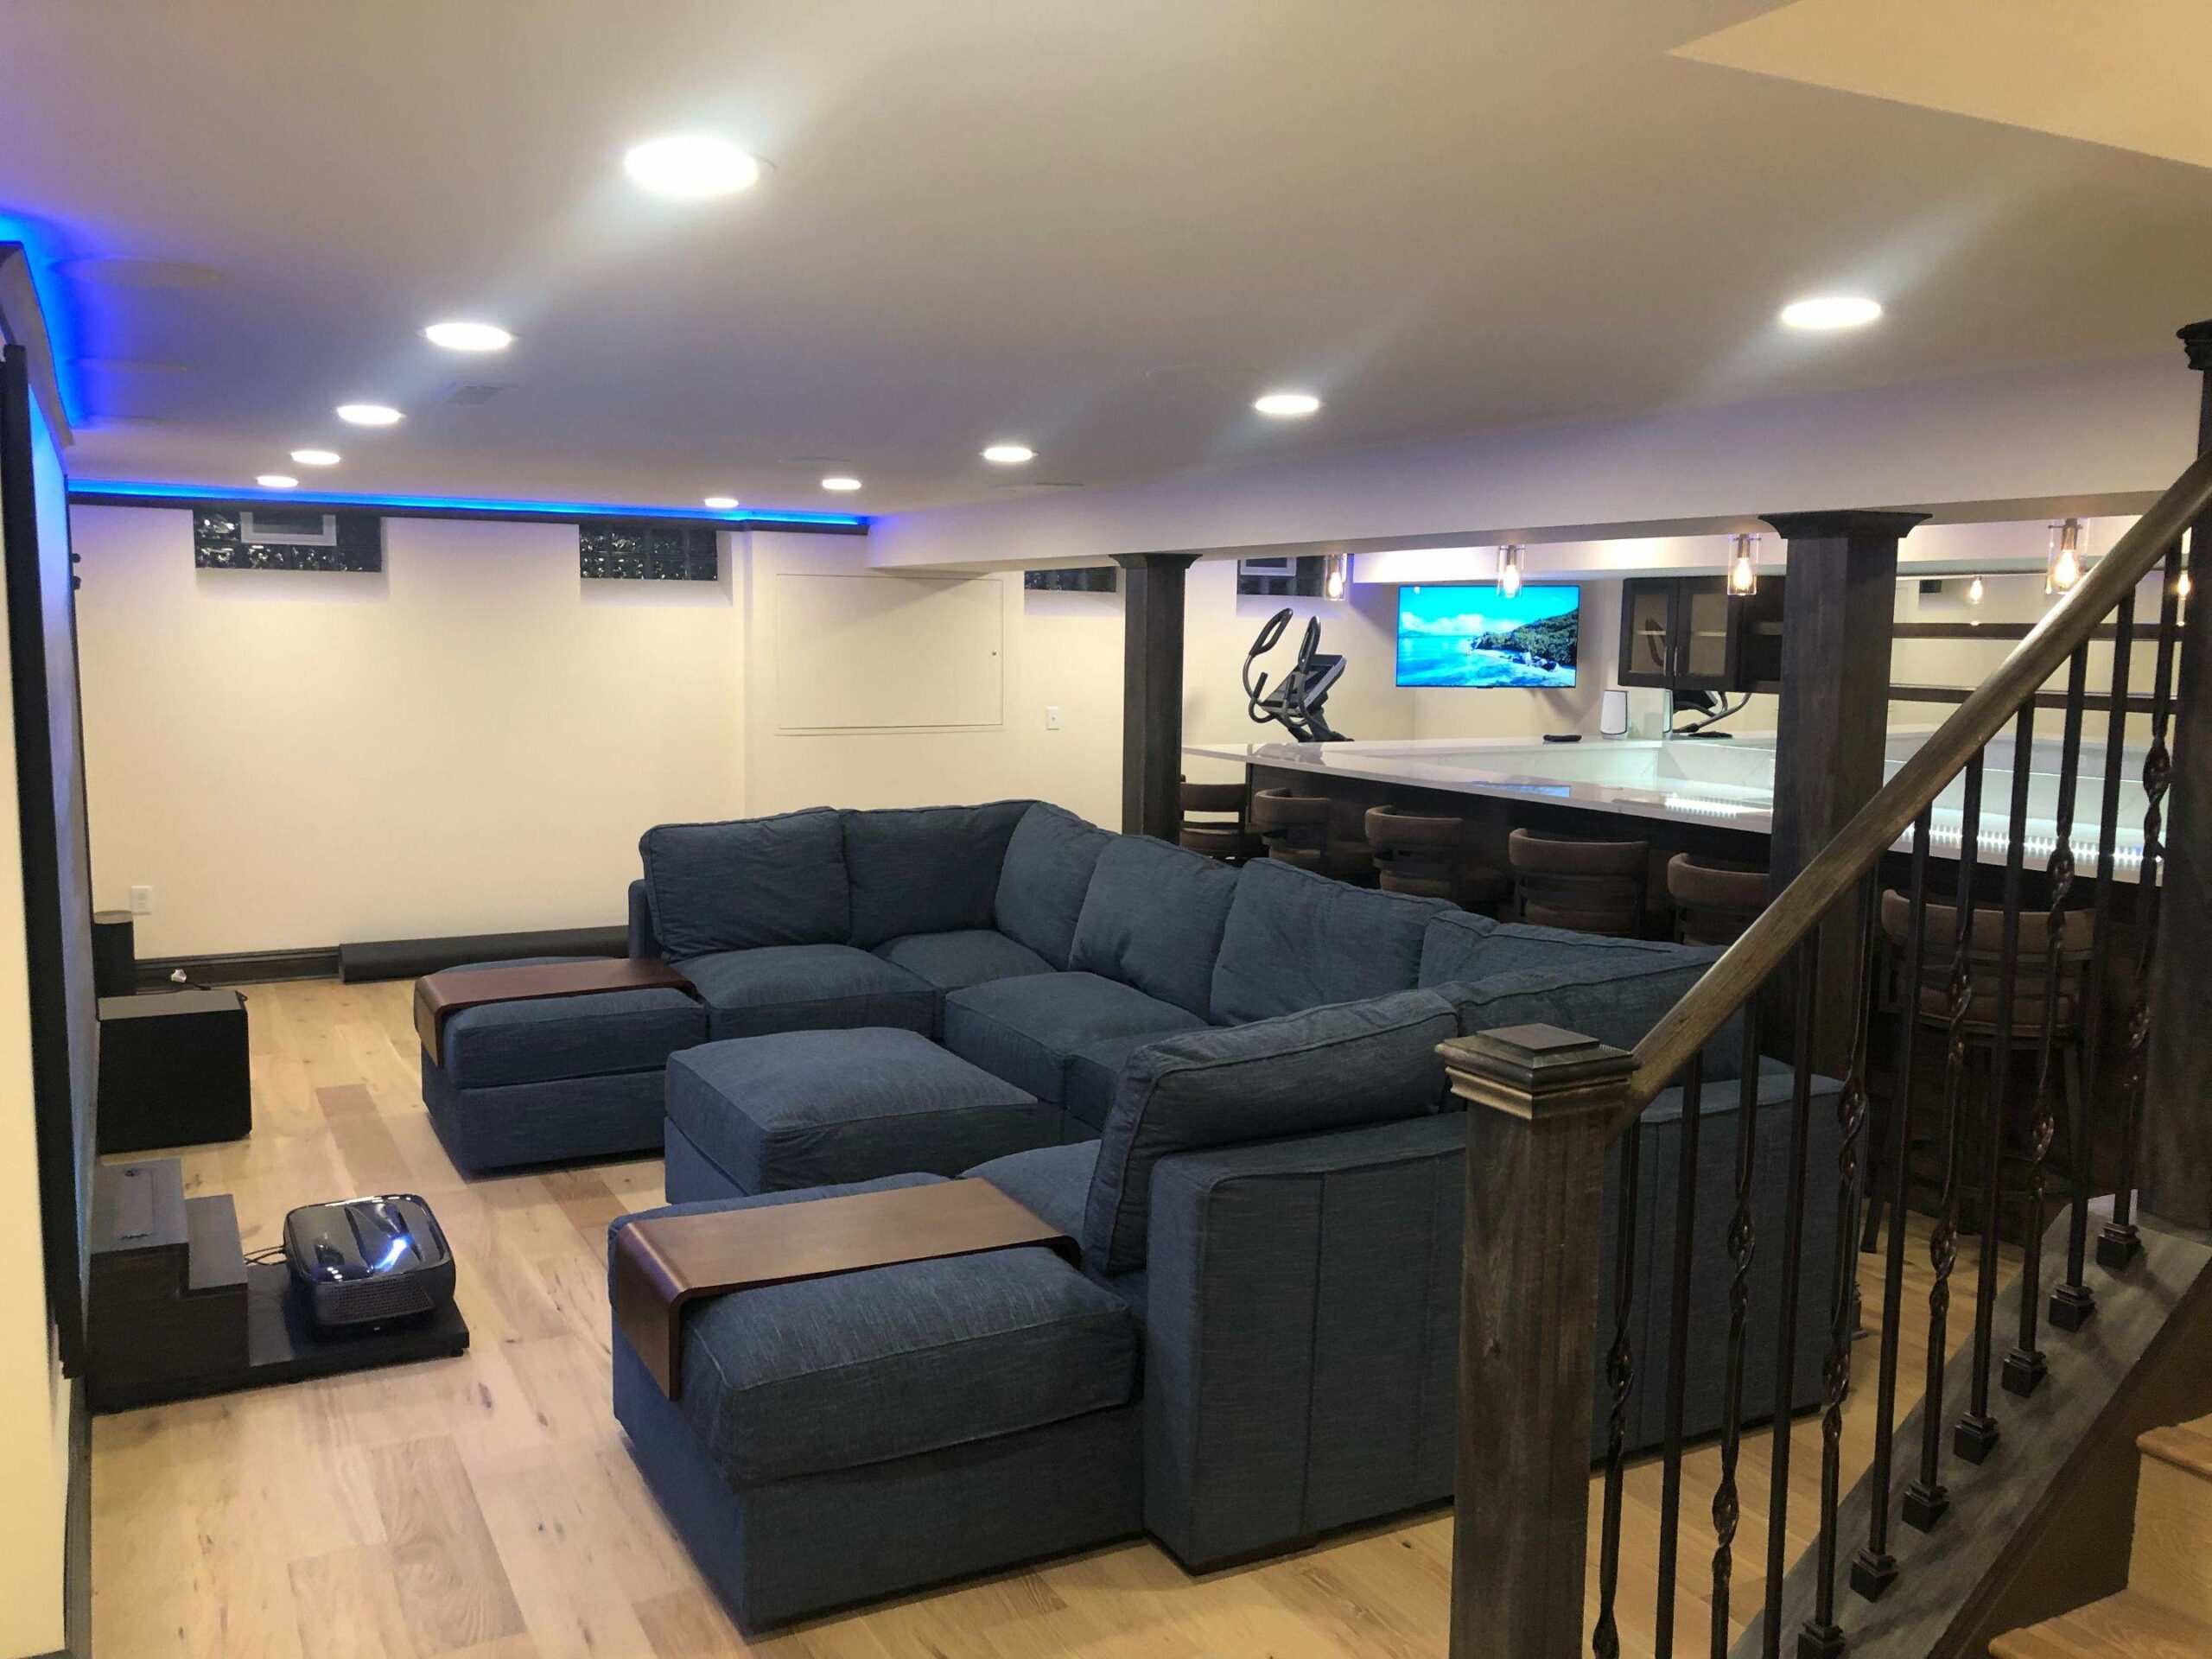 Keselman Construction Group Inc Basement Remodel Couches Surrounding TV with Bar